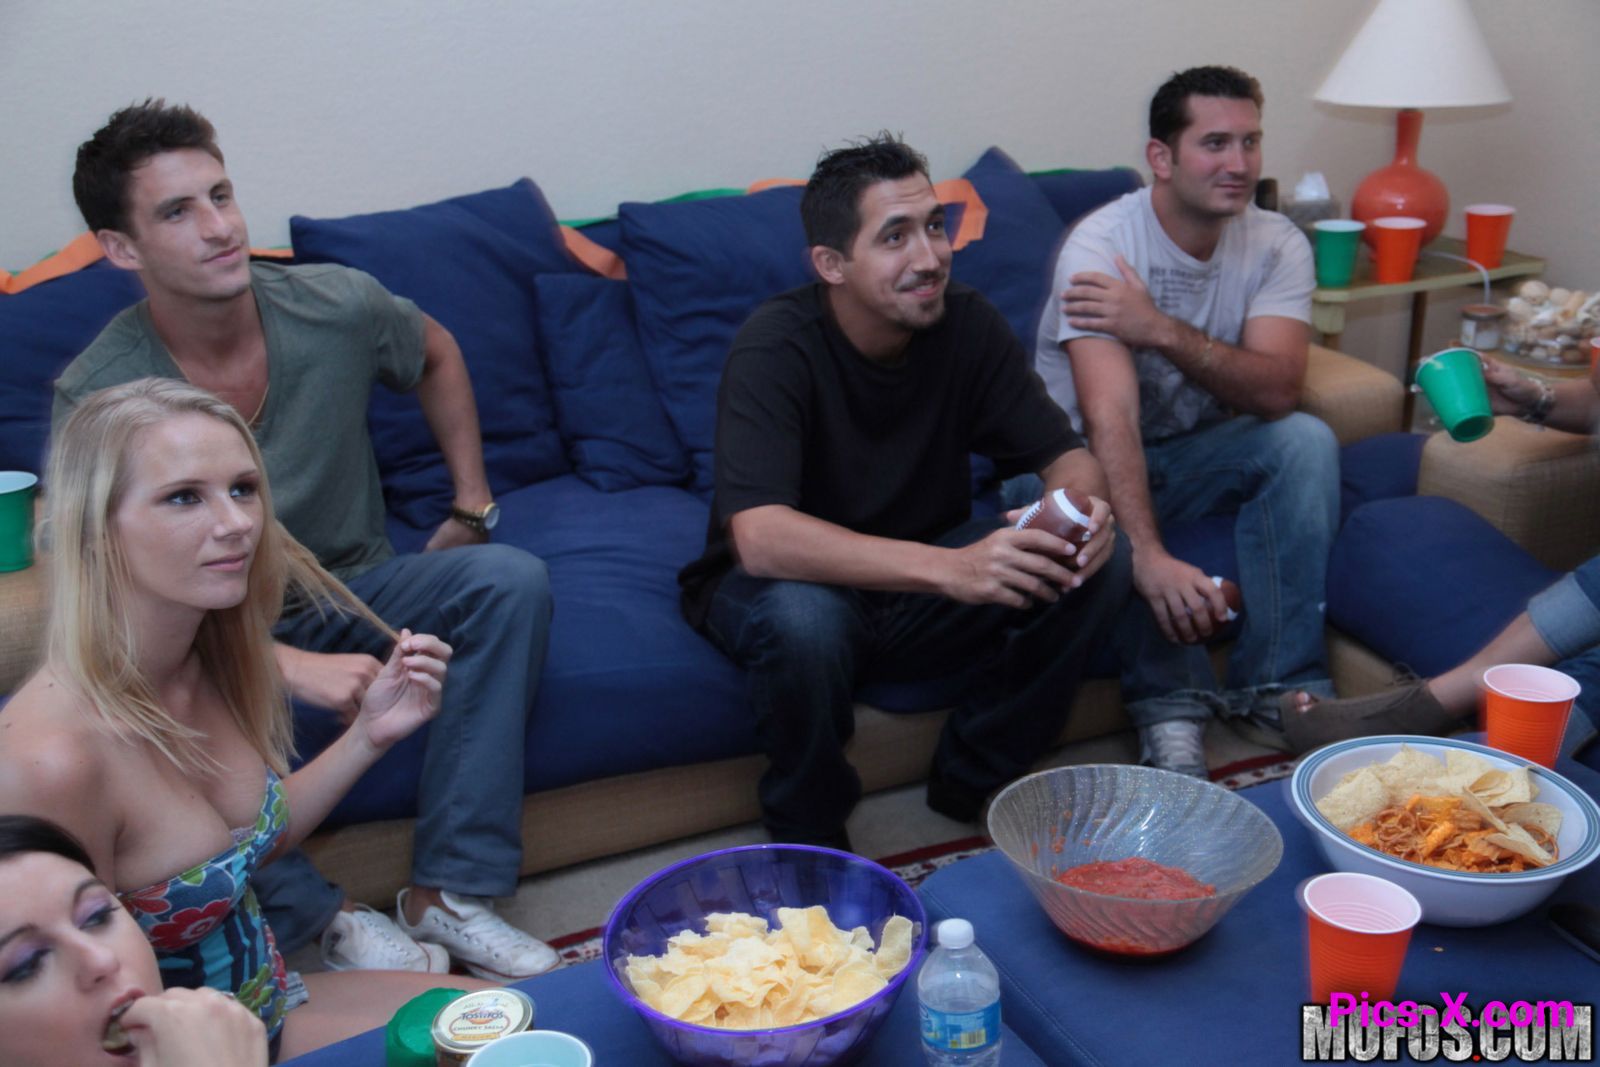 First Game Party - Real Slut Party - Image 1